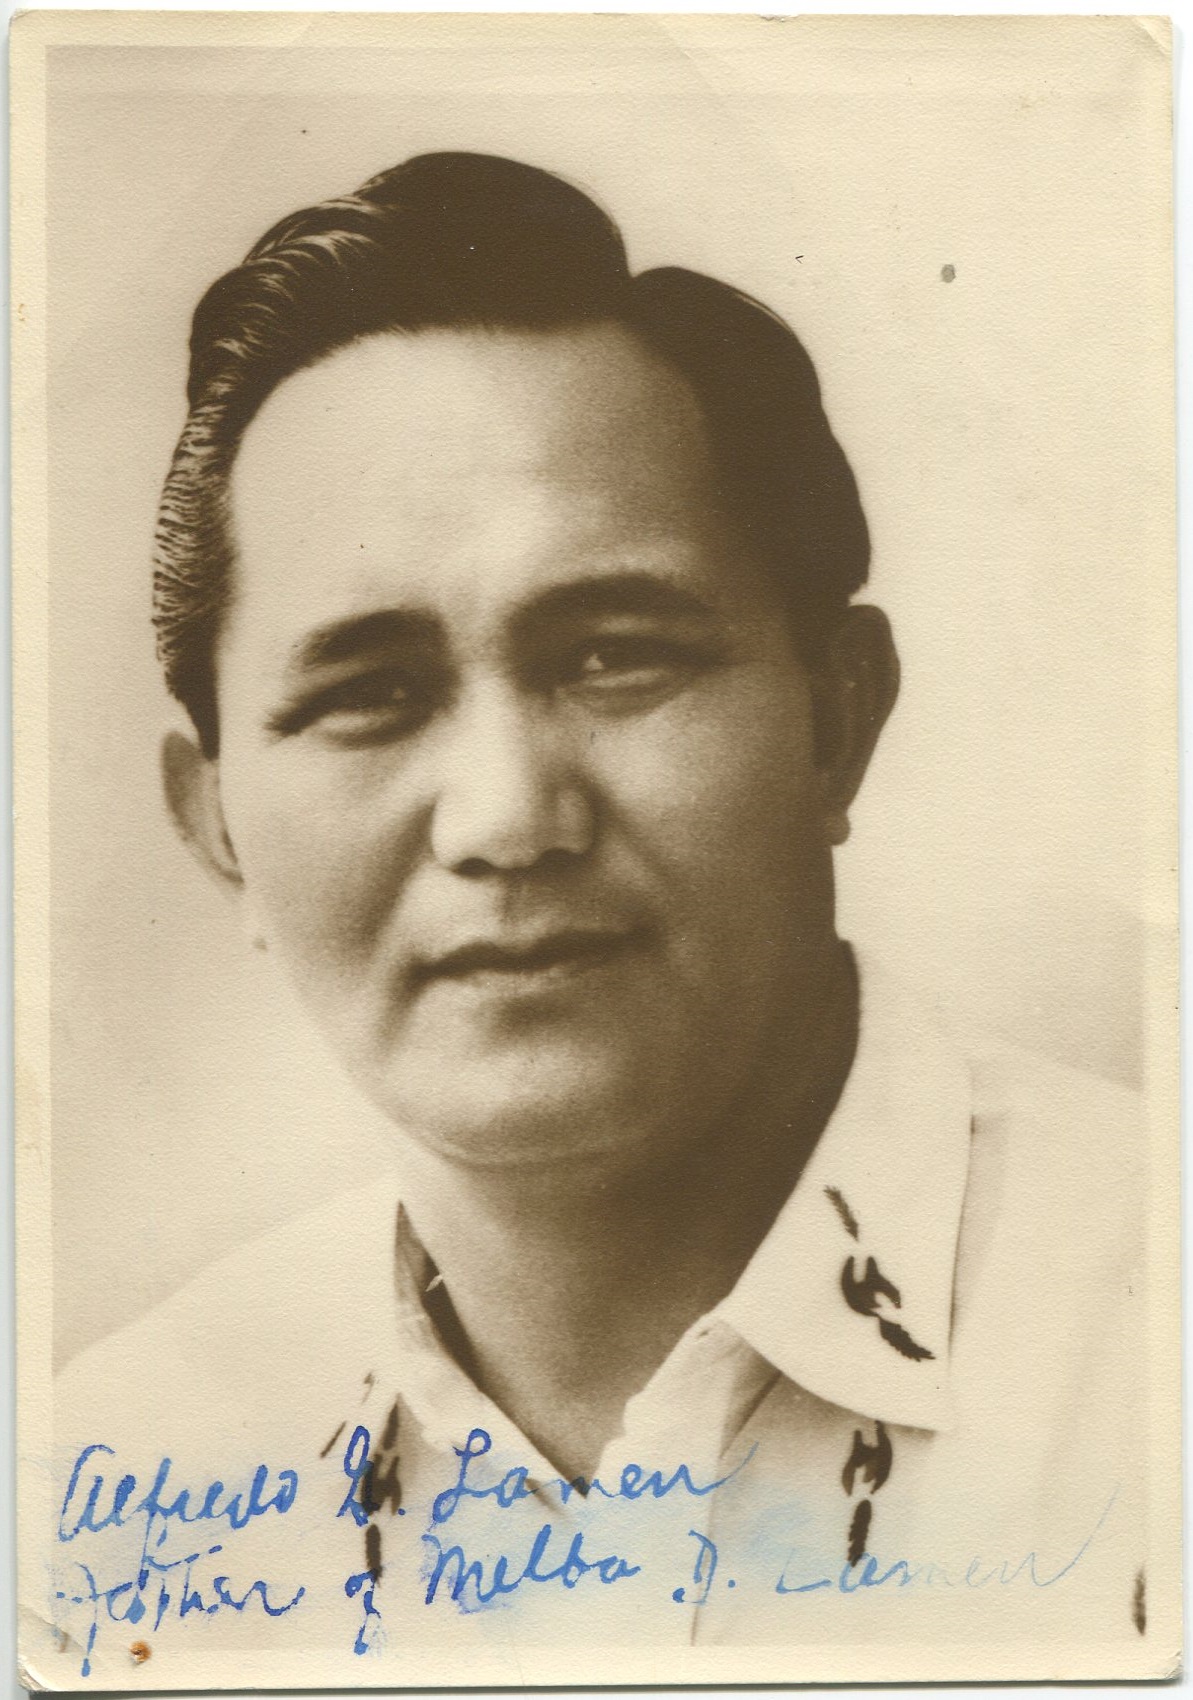 Photo of Alfredo Lamen, former First Provincial Governor of the Mountain Province. 

Any views, findings, conclusions, or recommendations expressed in this story do not necessarily represent those of the National Endowment for the Humanities. (c) Field Museum of Natural History - CC BY-NC 4.0